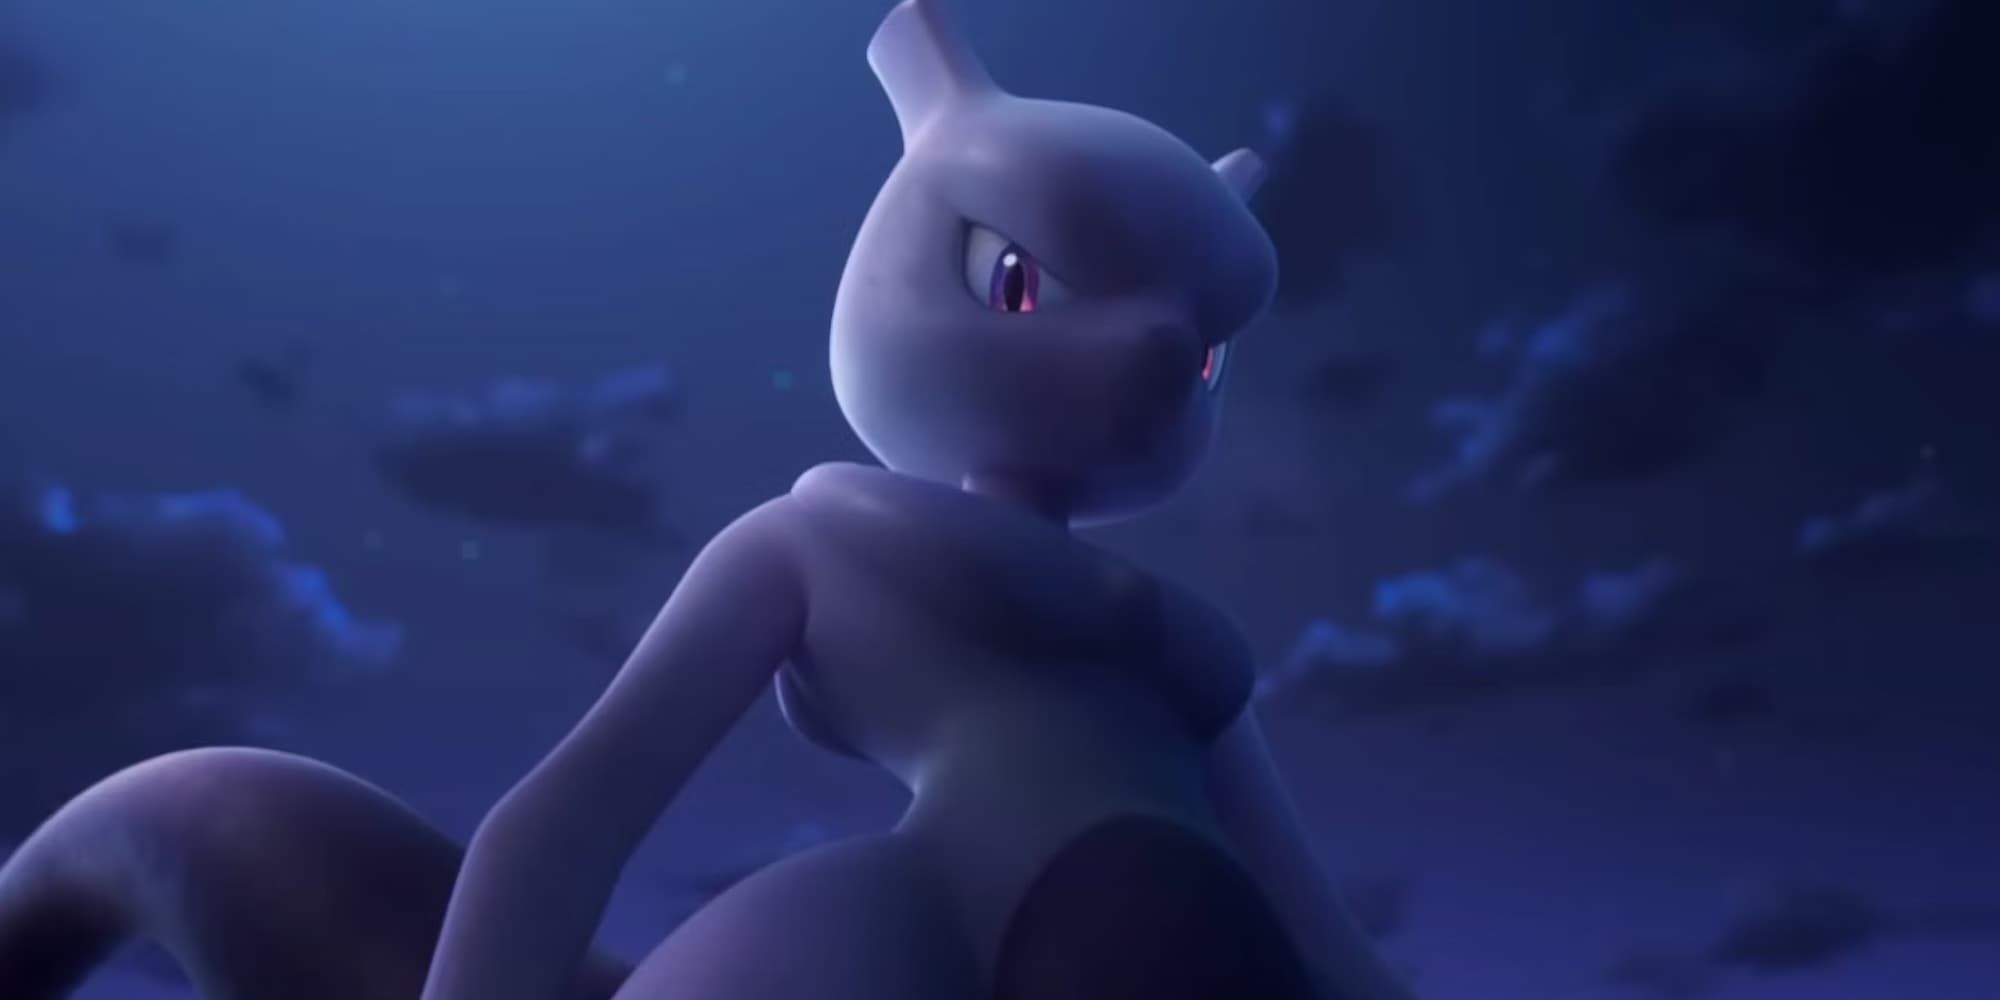 Pokemon Scarlet & Violet datamines hint Mewtwo is coming to Tera